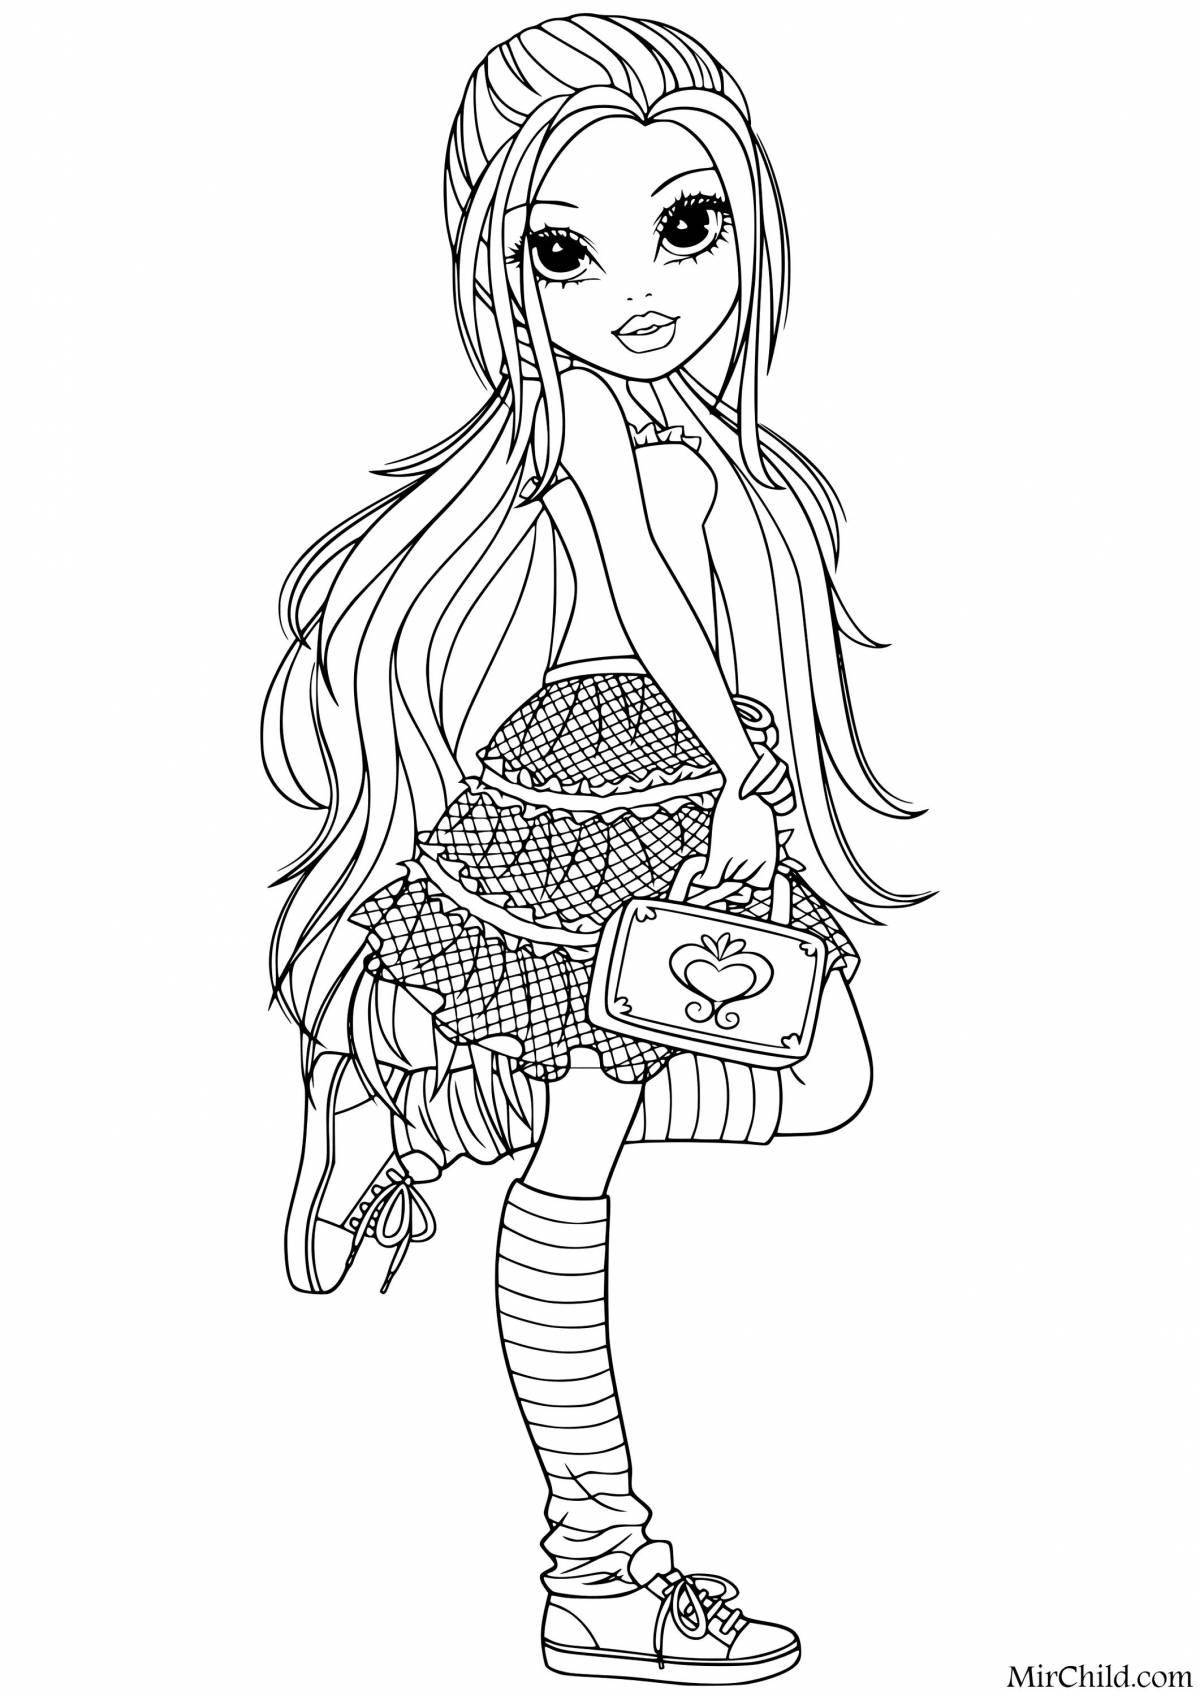 Exalted coloring pages for girls 10 years beautiful